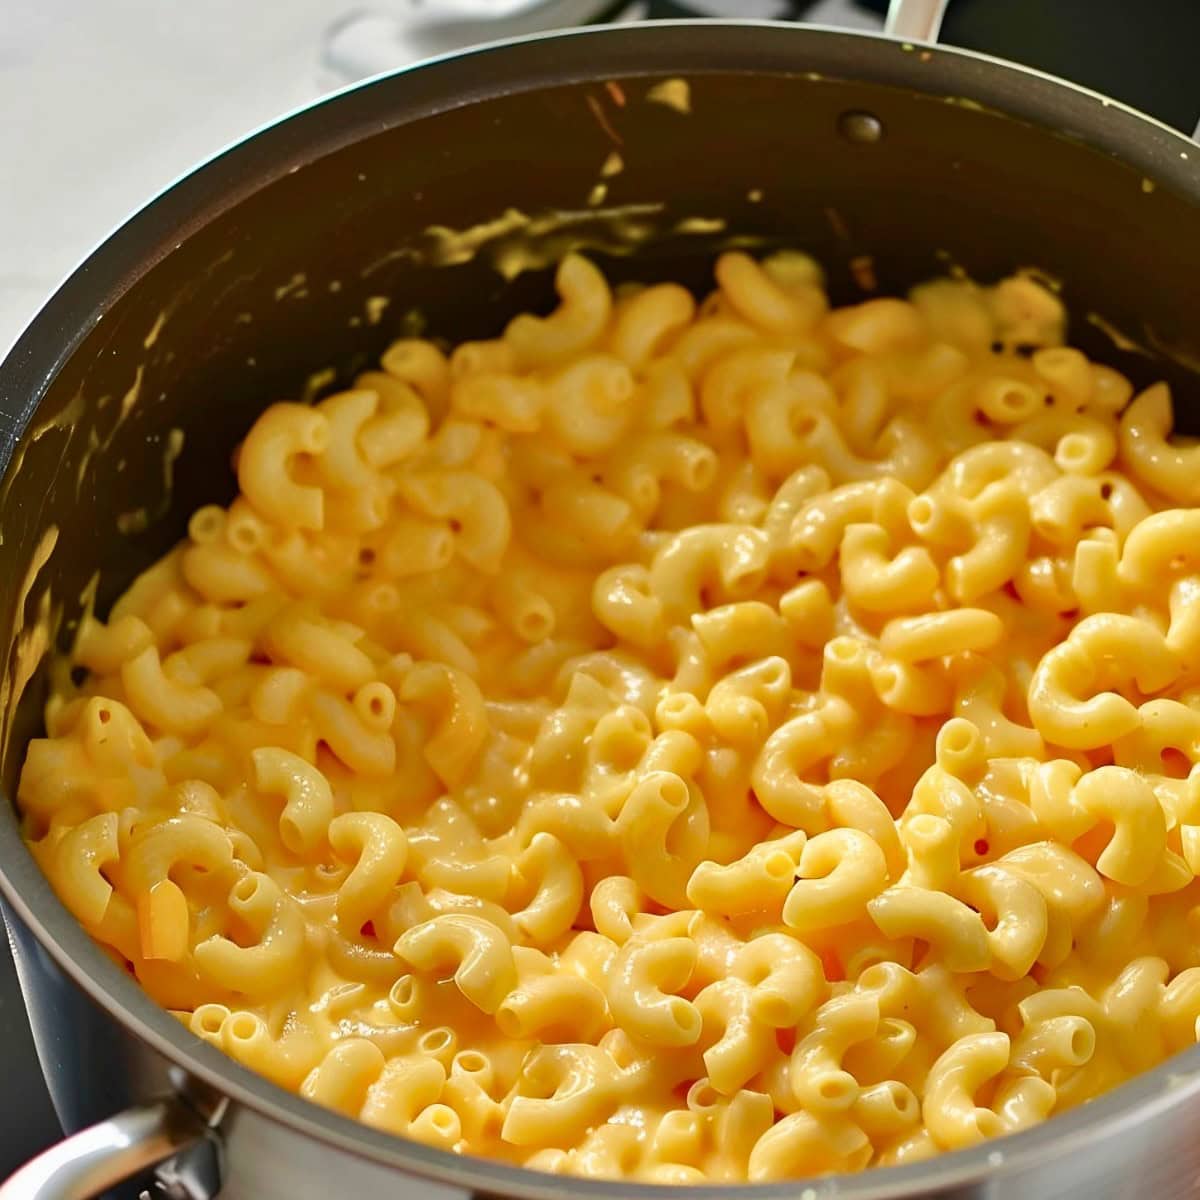 Top Side View of Macaroni and Cheese Cooking in a Pot